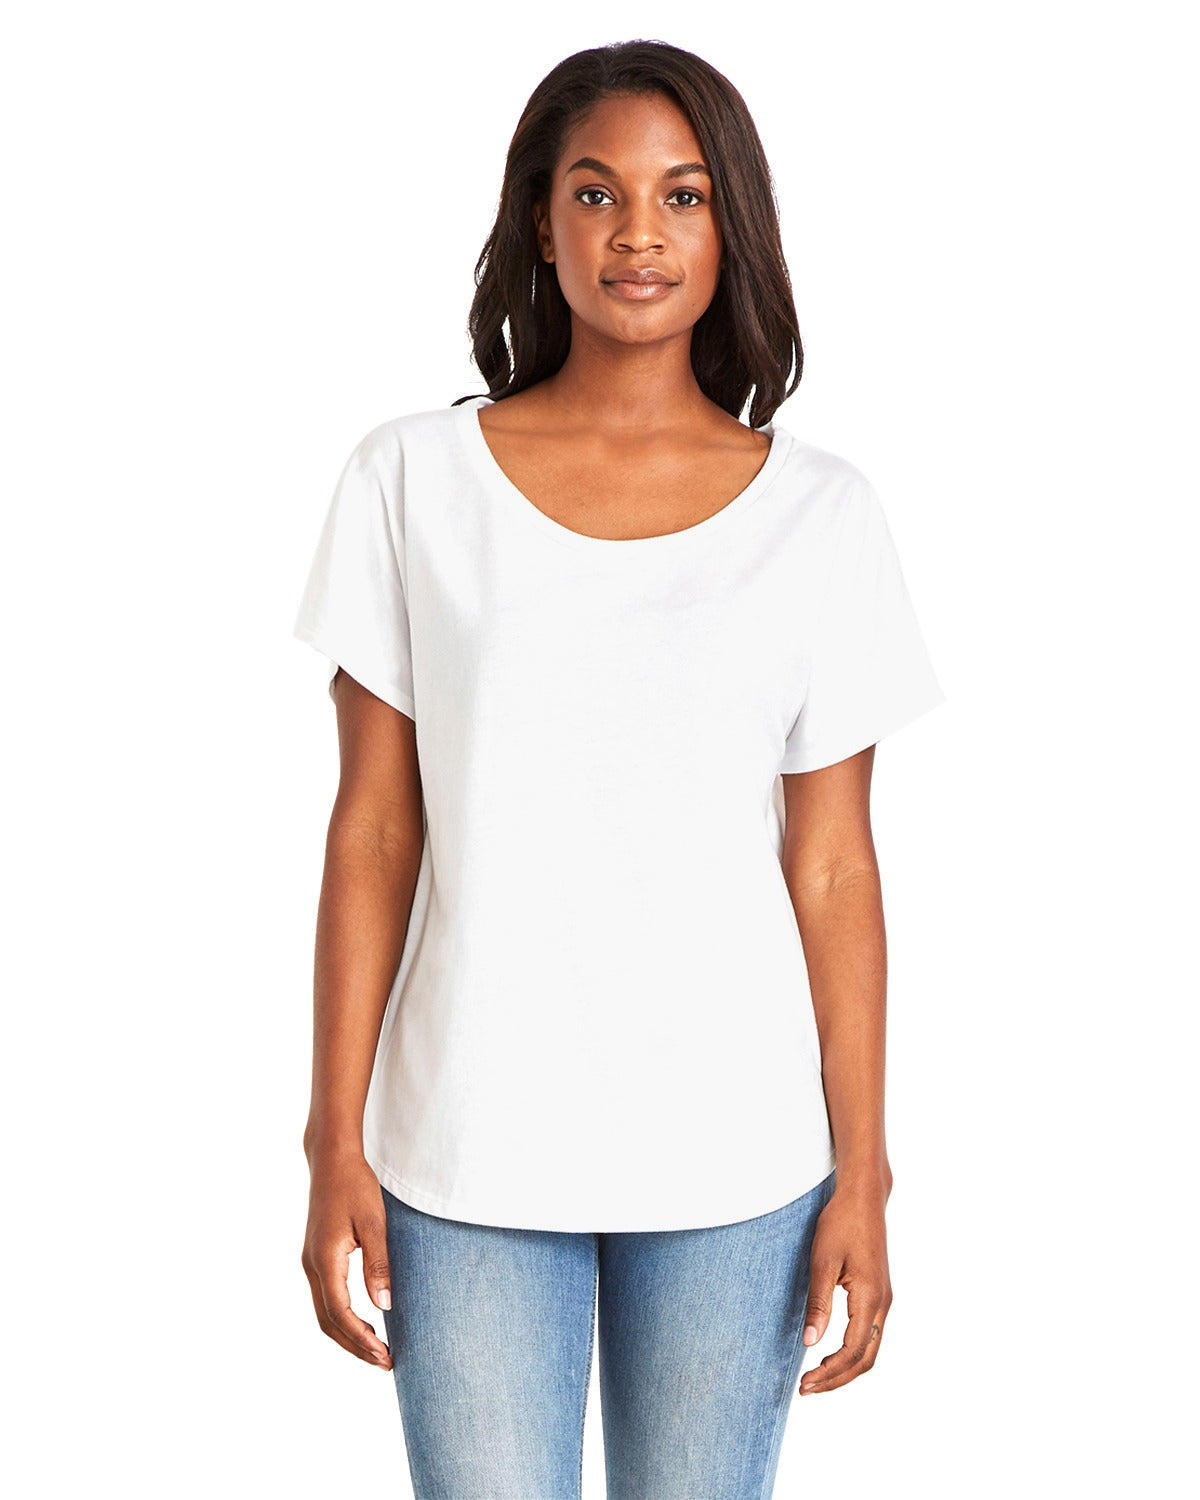 Ladies' Dolman Relaxed Fit T-Shirt 1560